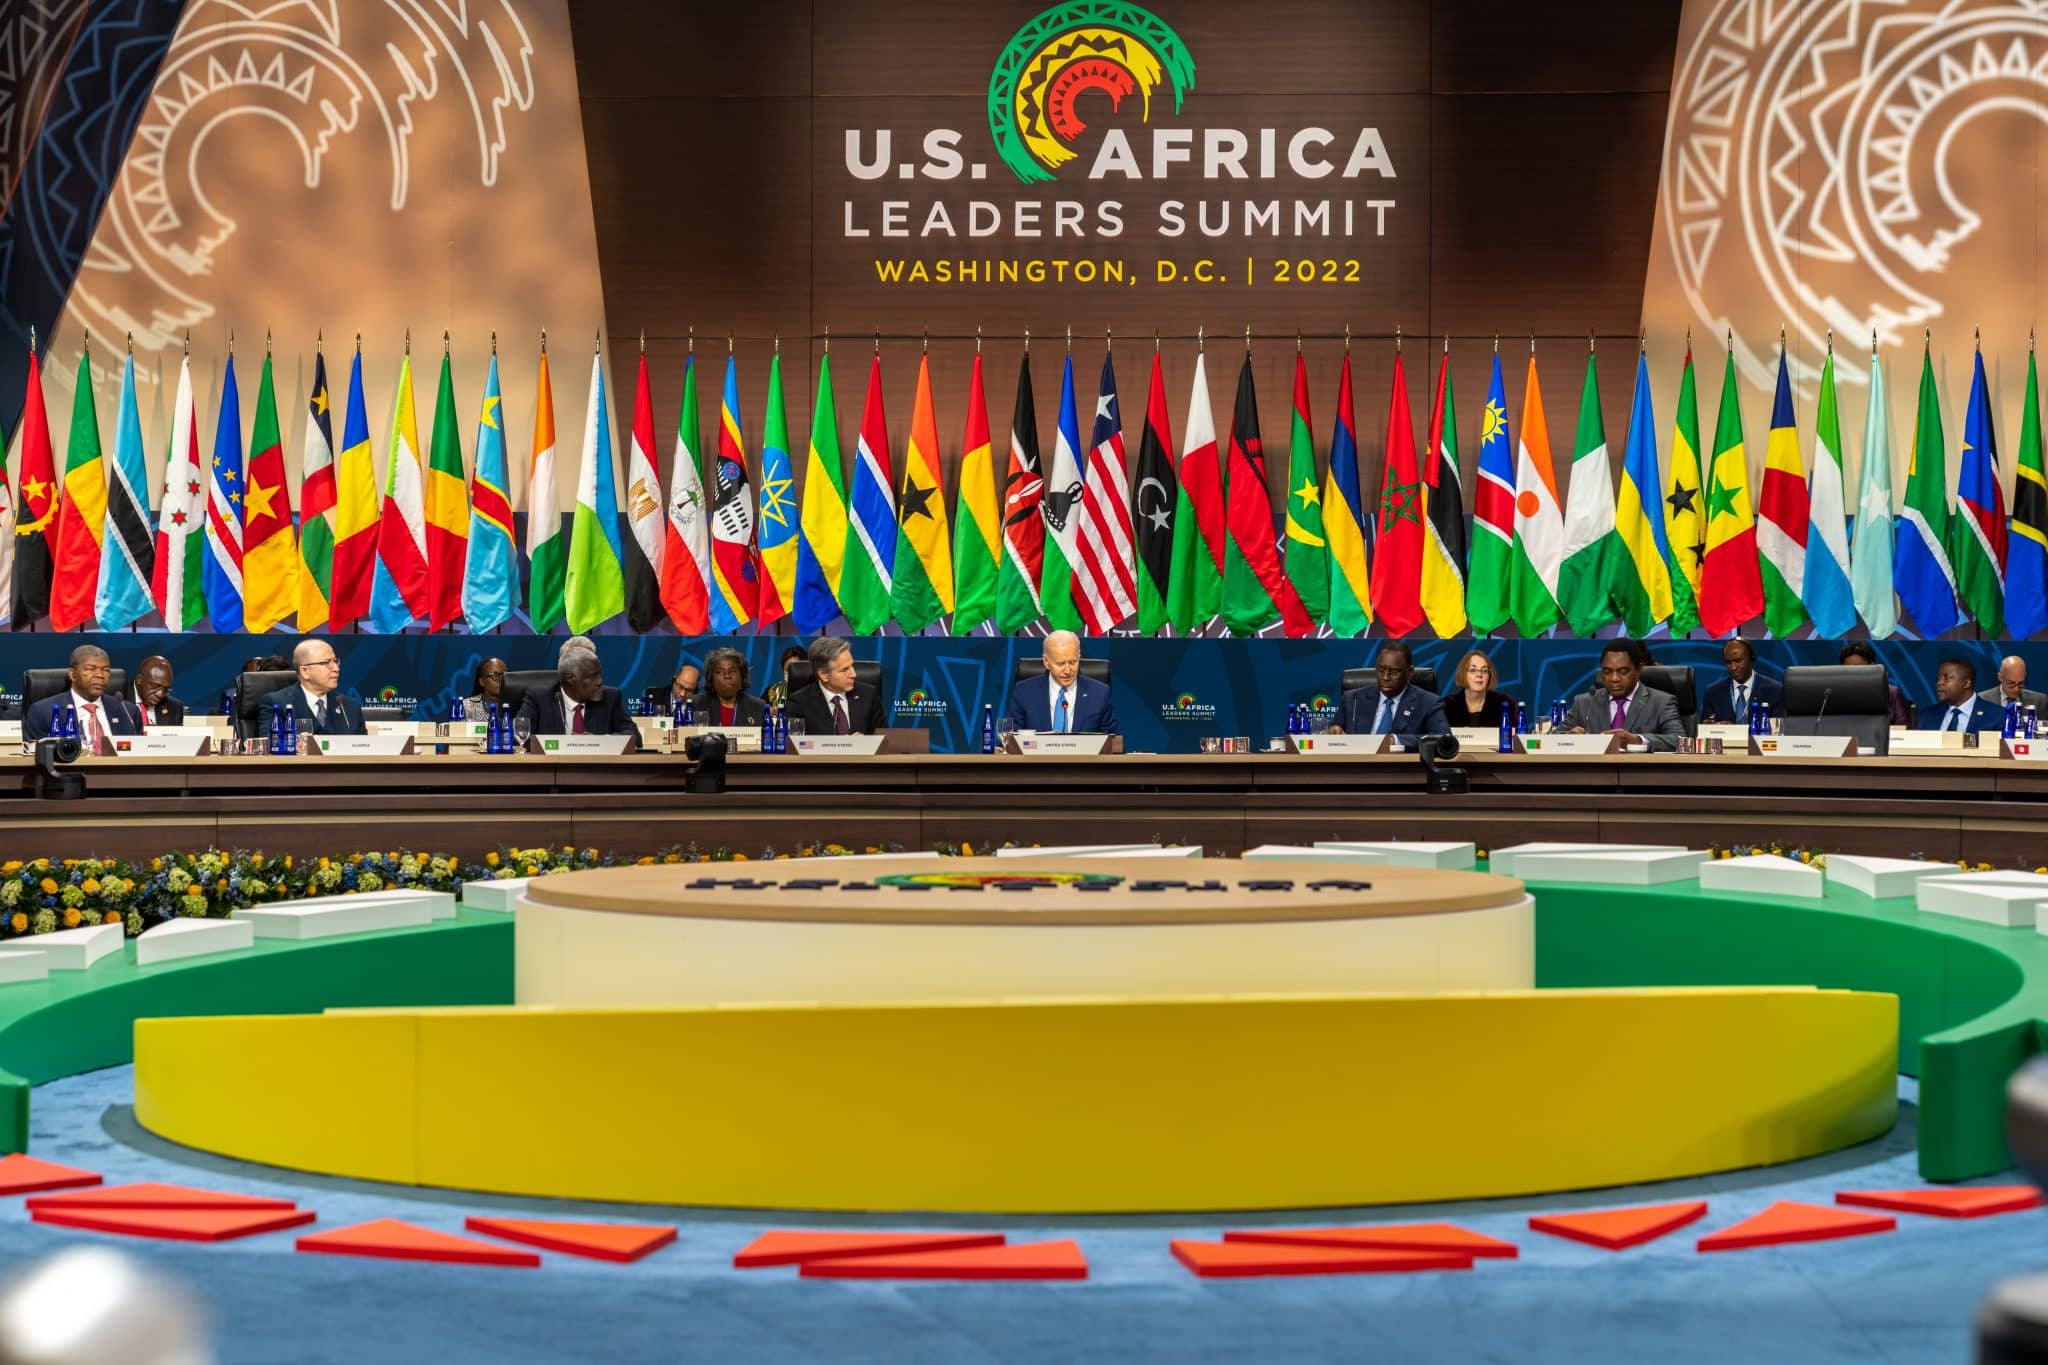 President Joe Biden and Secretary of State Antony J. Blinken participate in the U.S.-Africa Summit Leaders Session on partnering on the African Union’s Agenda 2063 in Washington, D.C., on December 15, 2022. [State Department Photo by Ron Przysucha